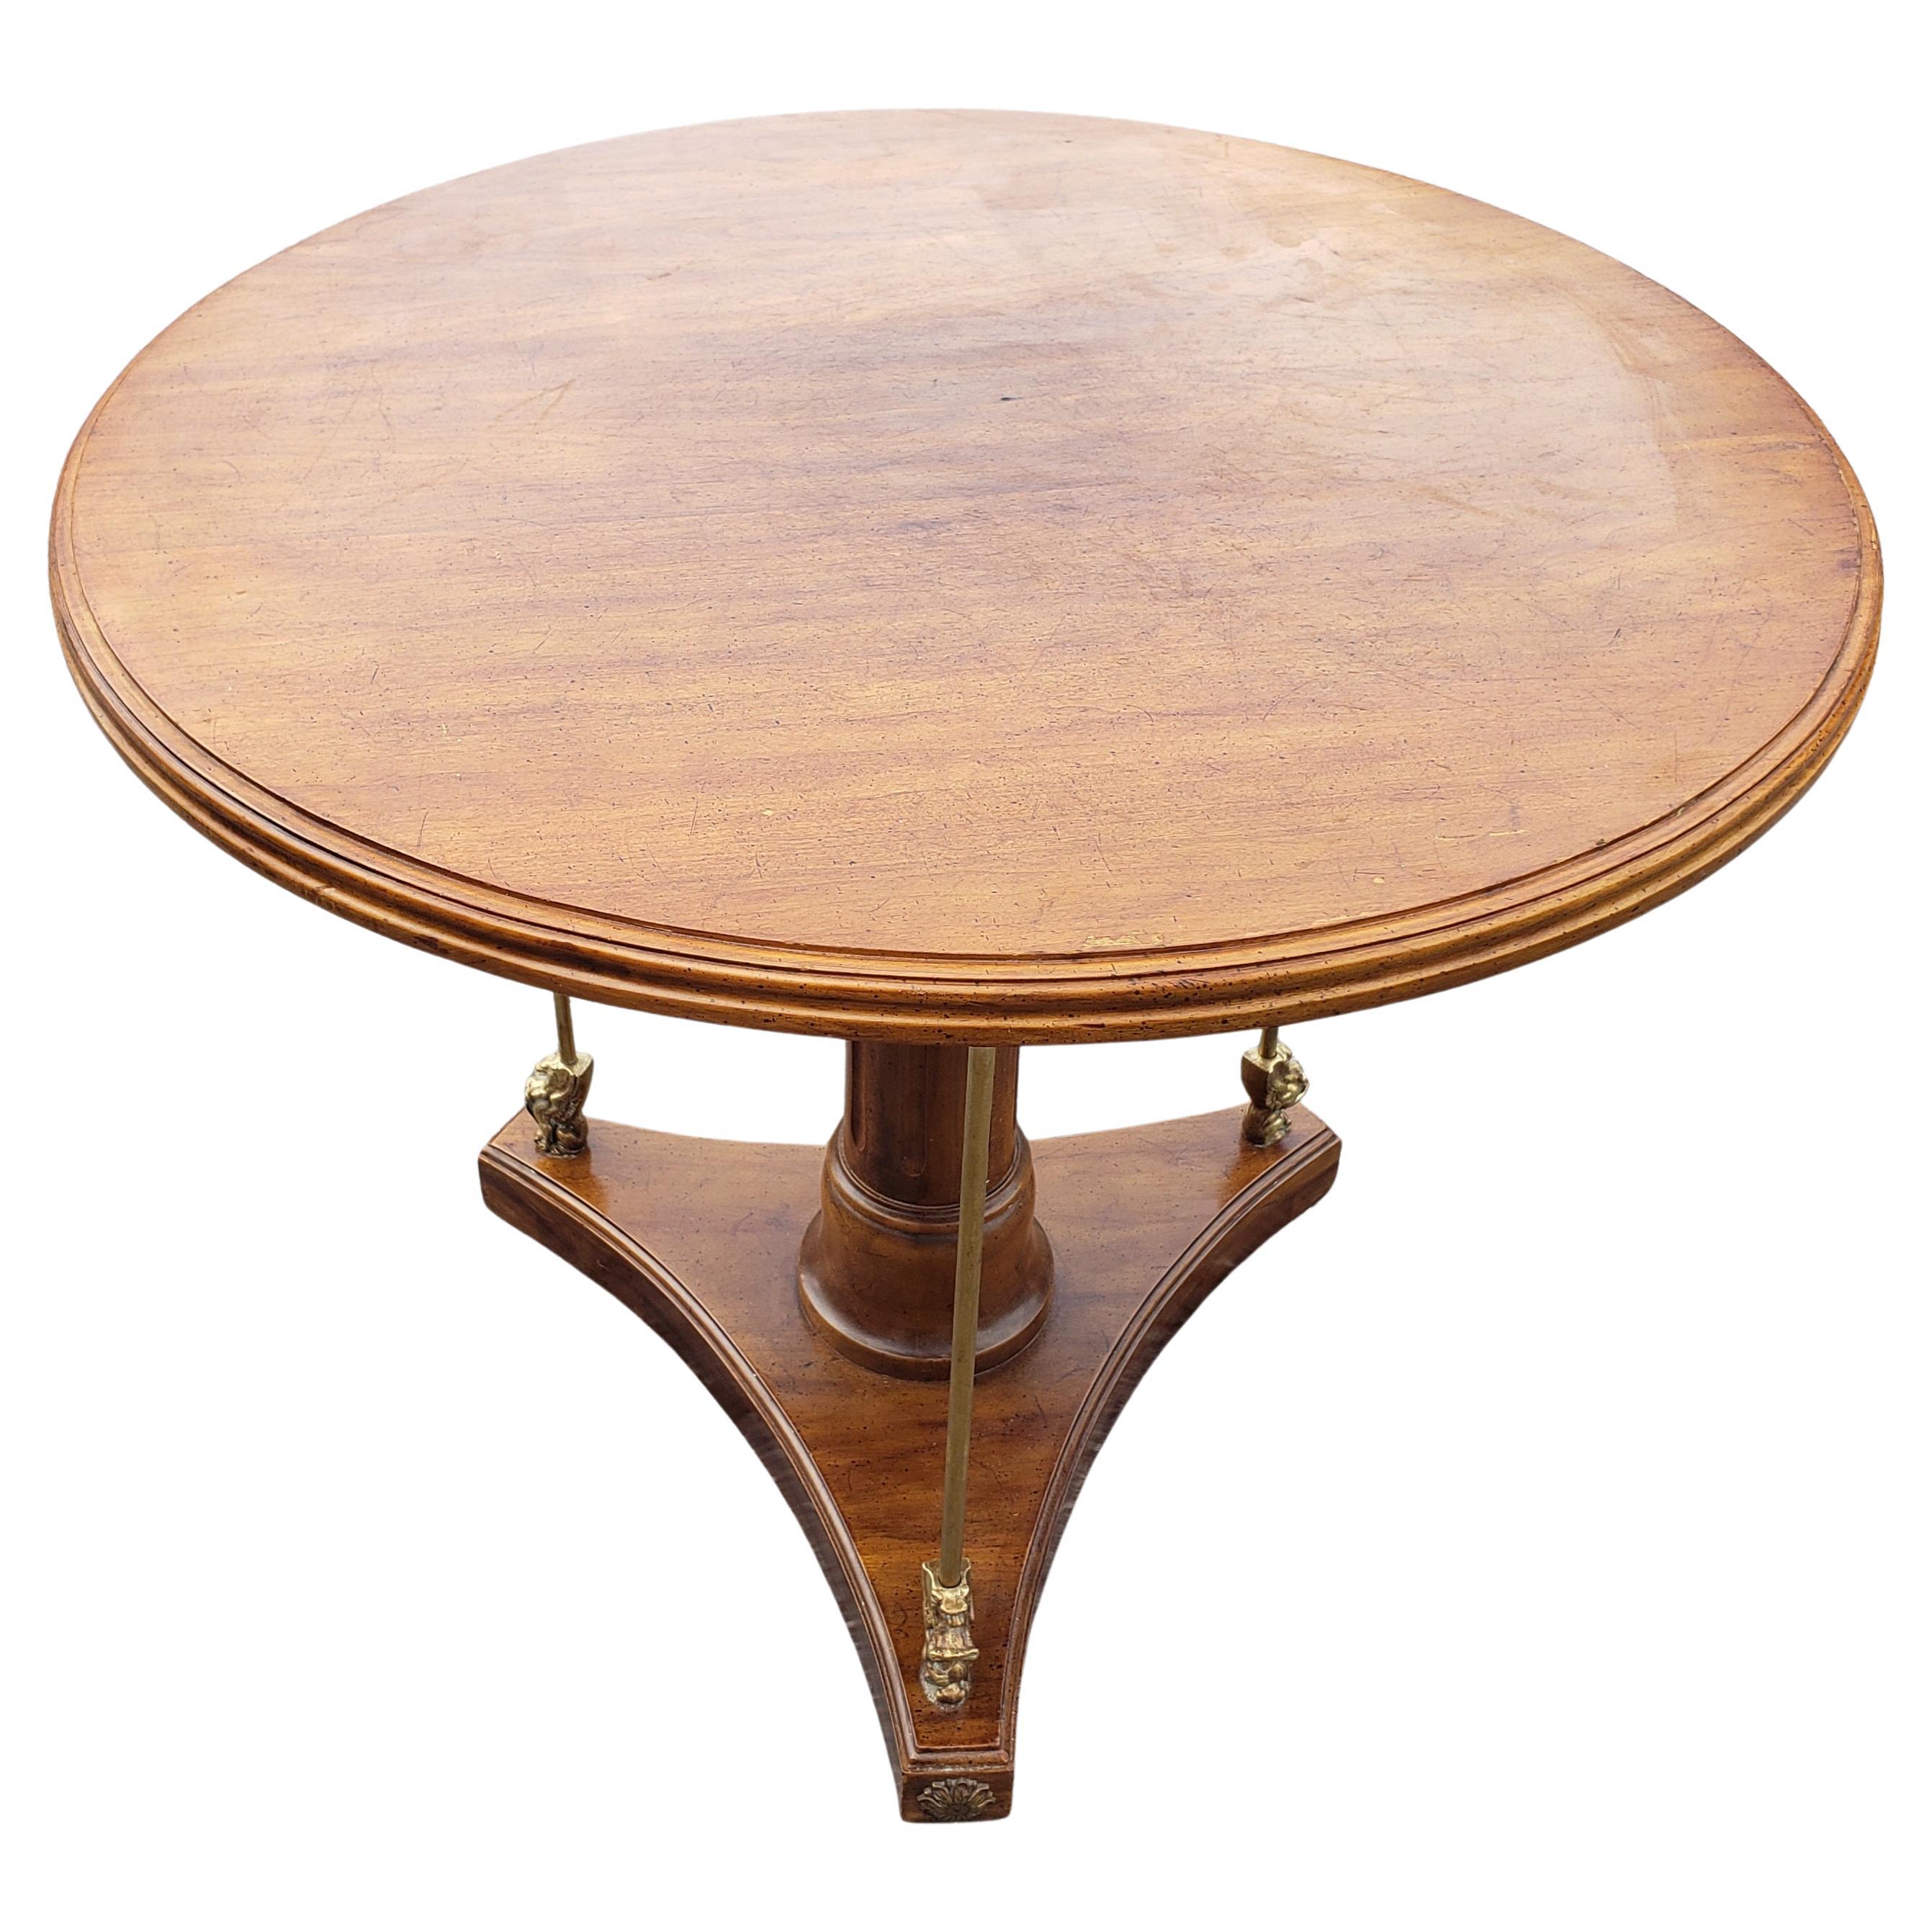 Charles X Style Calais Cherry & Brass Gueridon Pedestal Table by Davis Cabinet In Good Condition For Sale In Germantown, MD